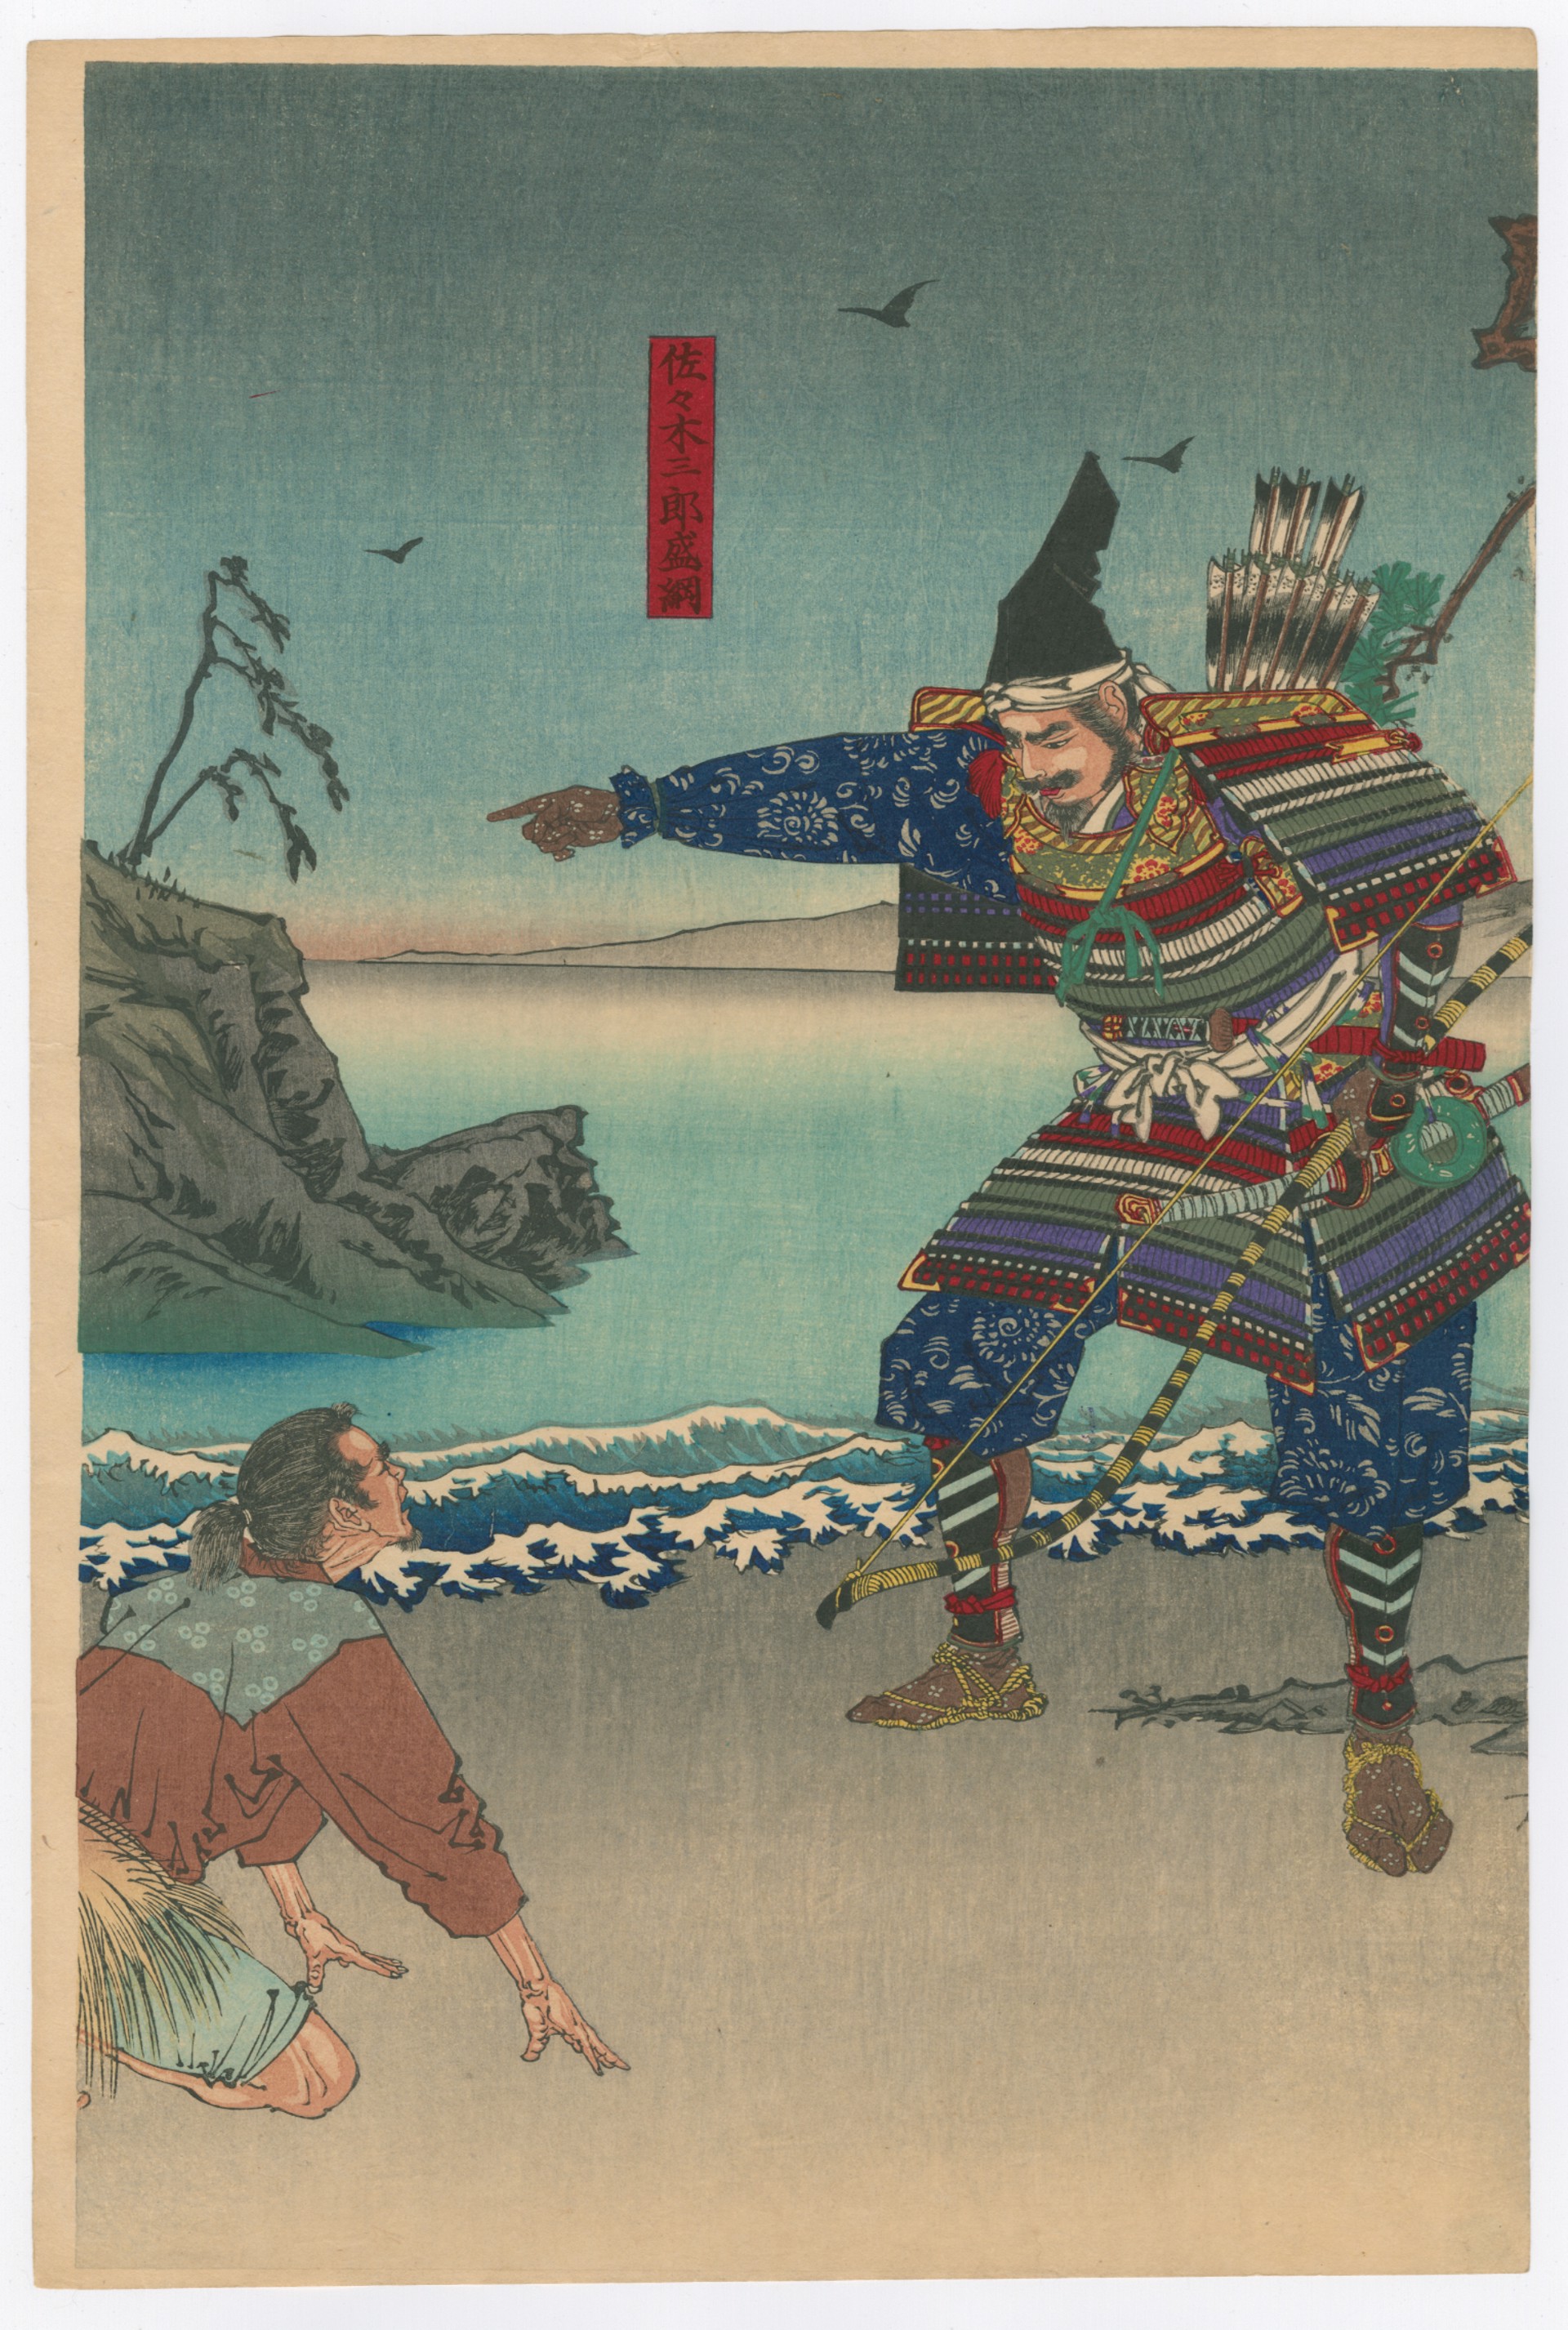 Sasaki Moritsuna Asking the Fisherman to Reveal the Location of the Ford so his Troops Could Cross and Attack the Taira at the Battle of Fujito (1180) by Toshikata